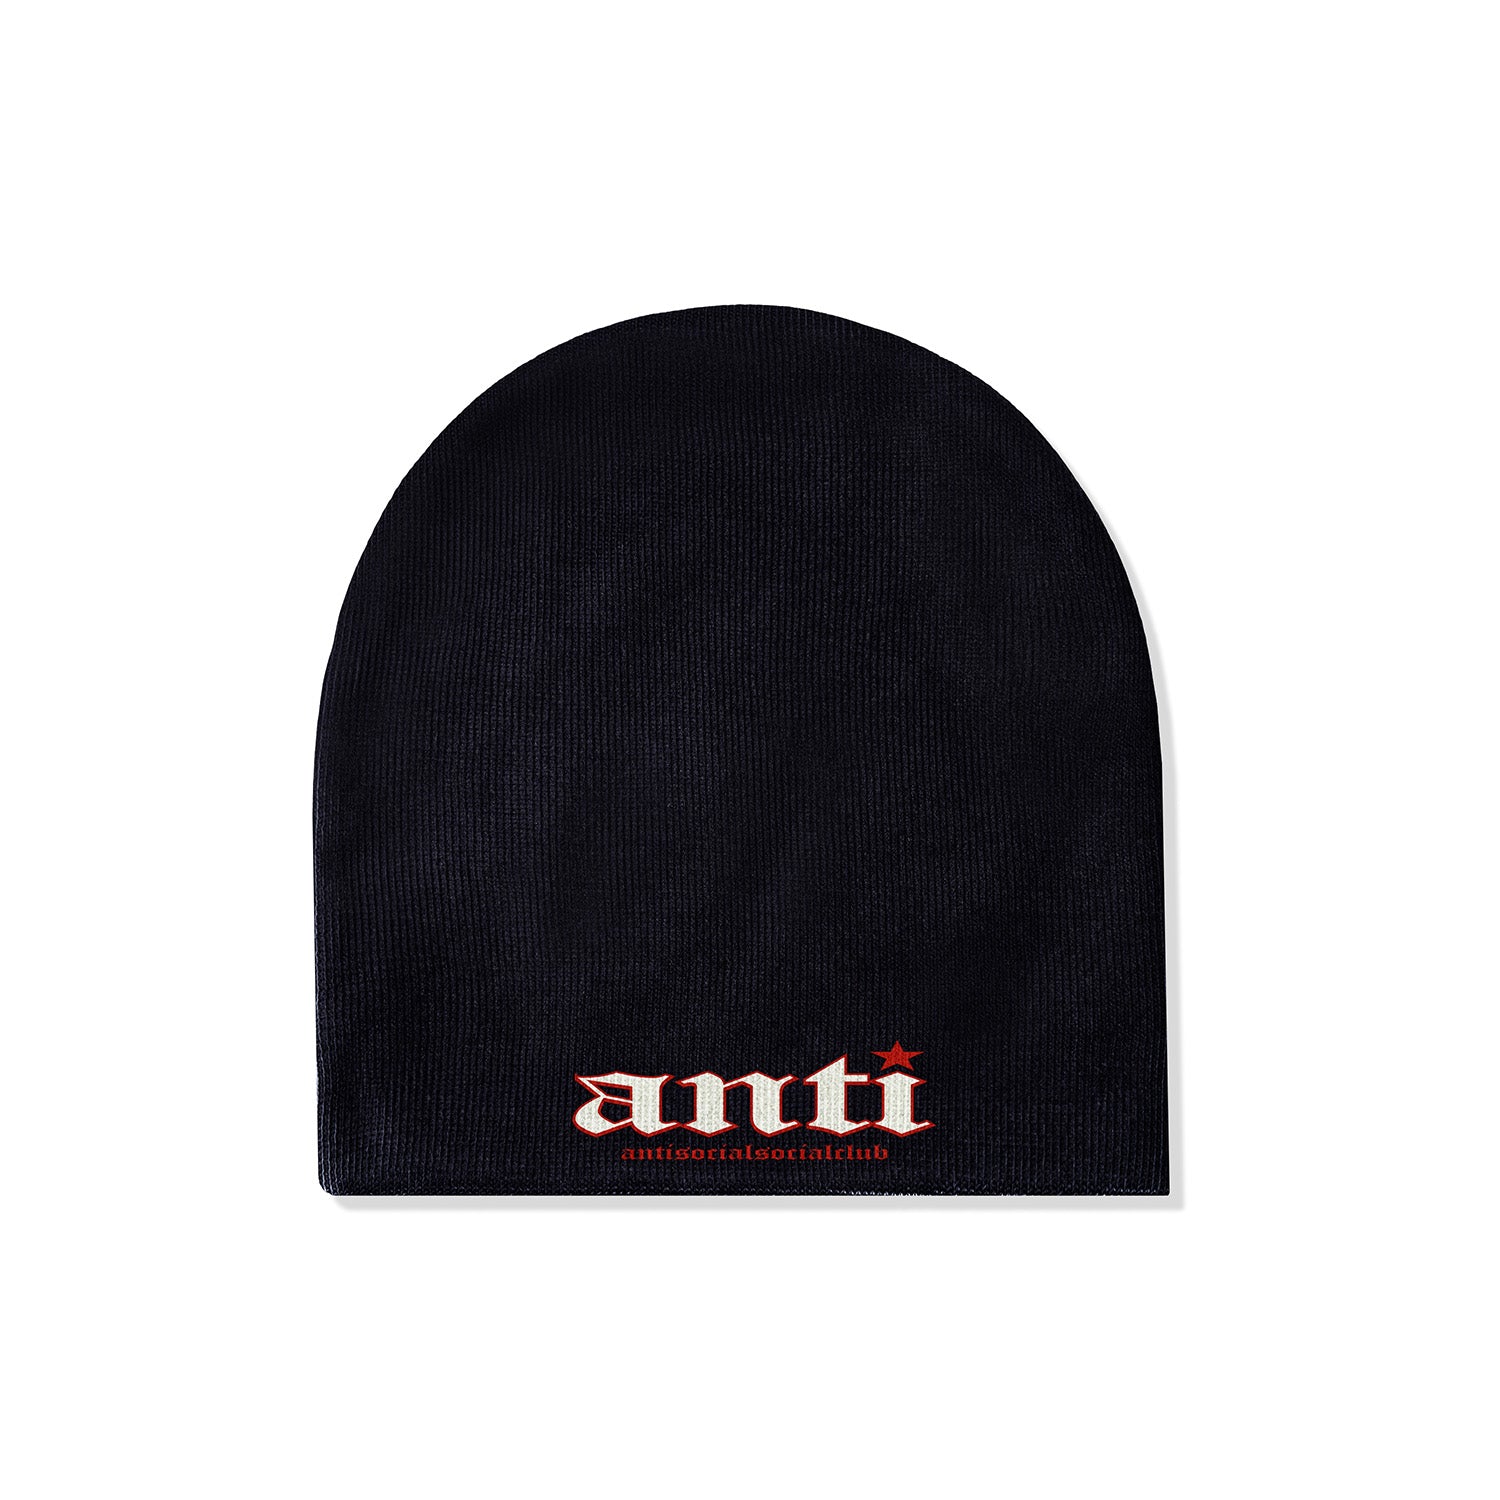 You Don't Know Me Beanie Black Front